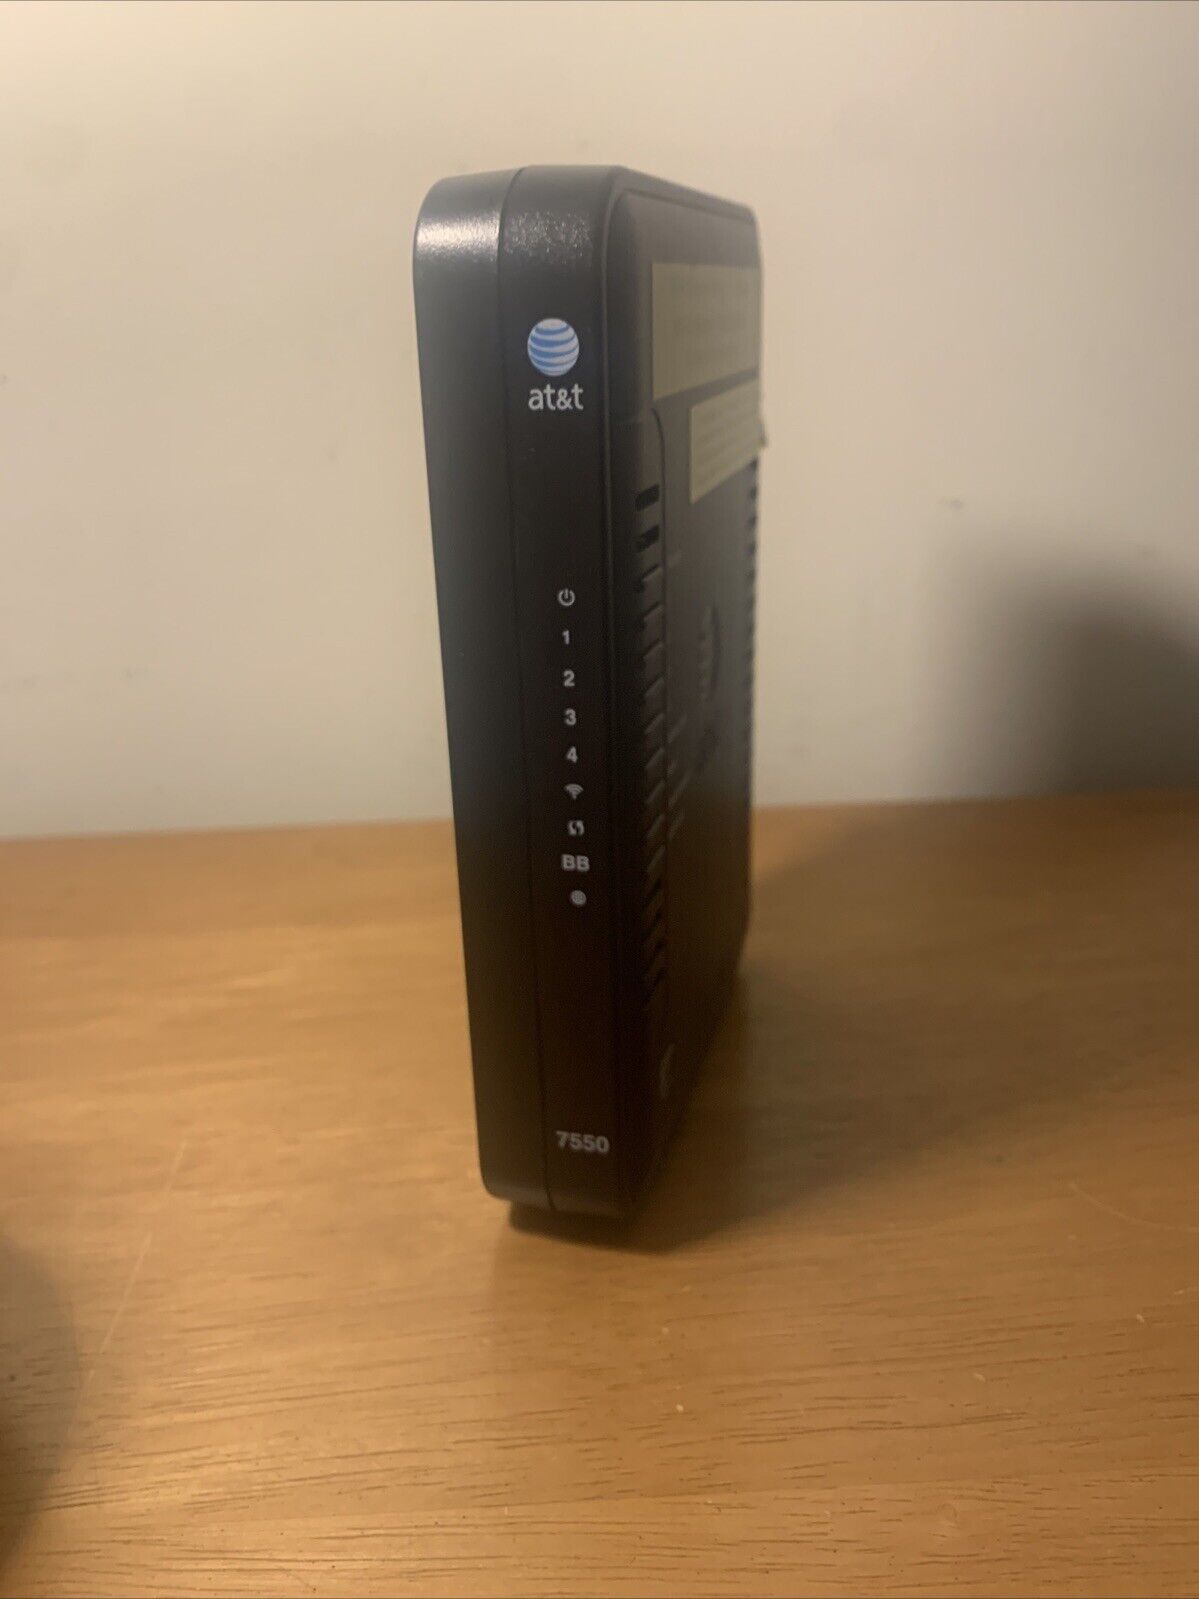 Netgear B90-755025-15 ADSL2+ Modem and Wireless Router AT&T Unit Only No Cords